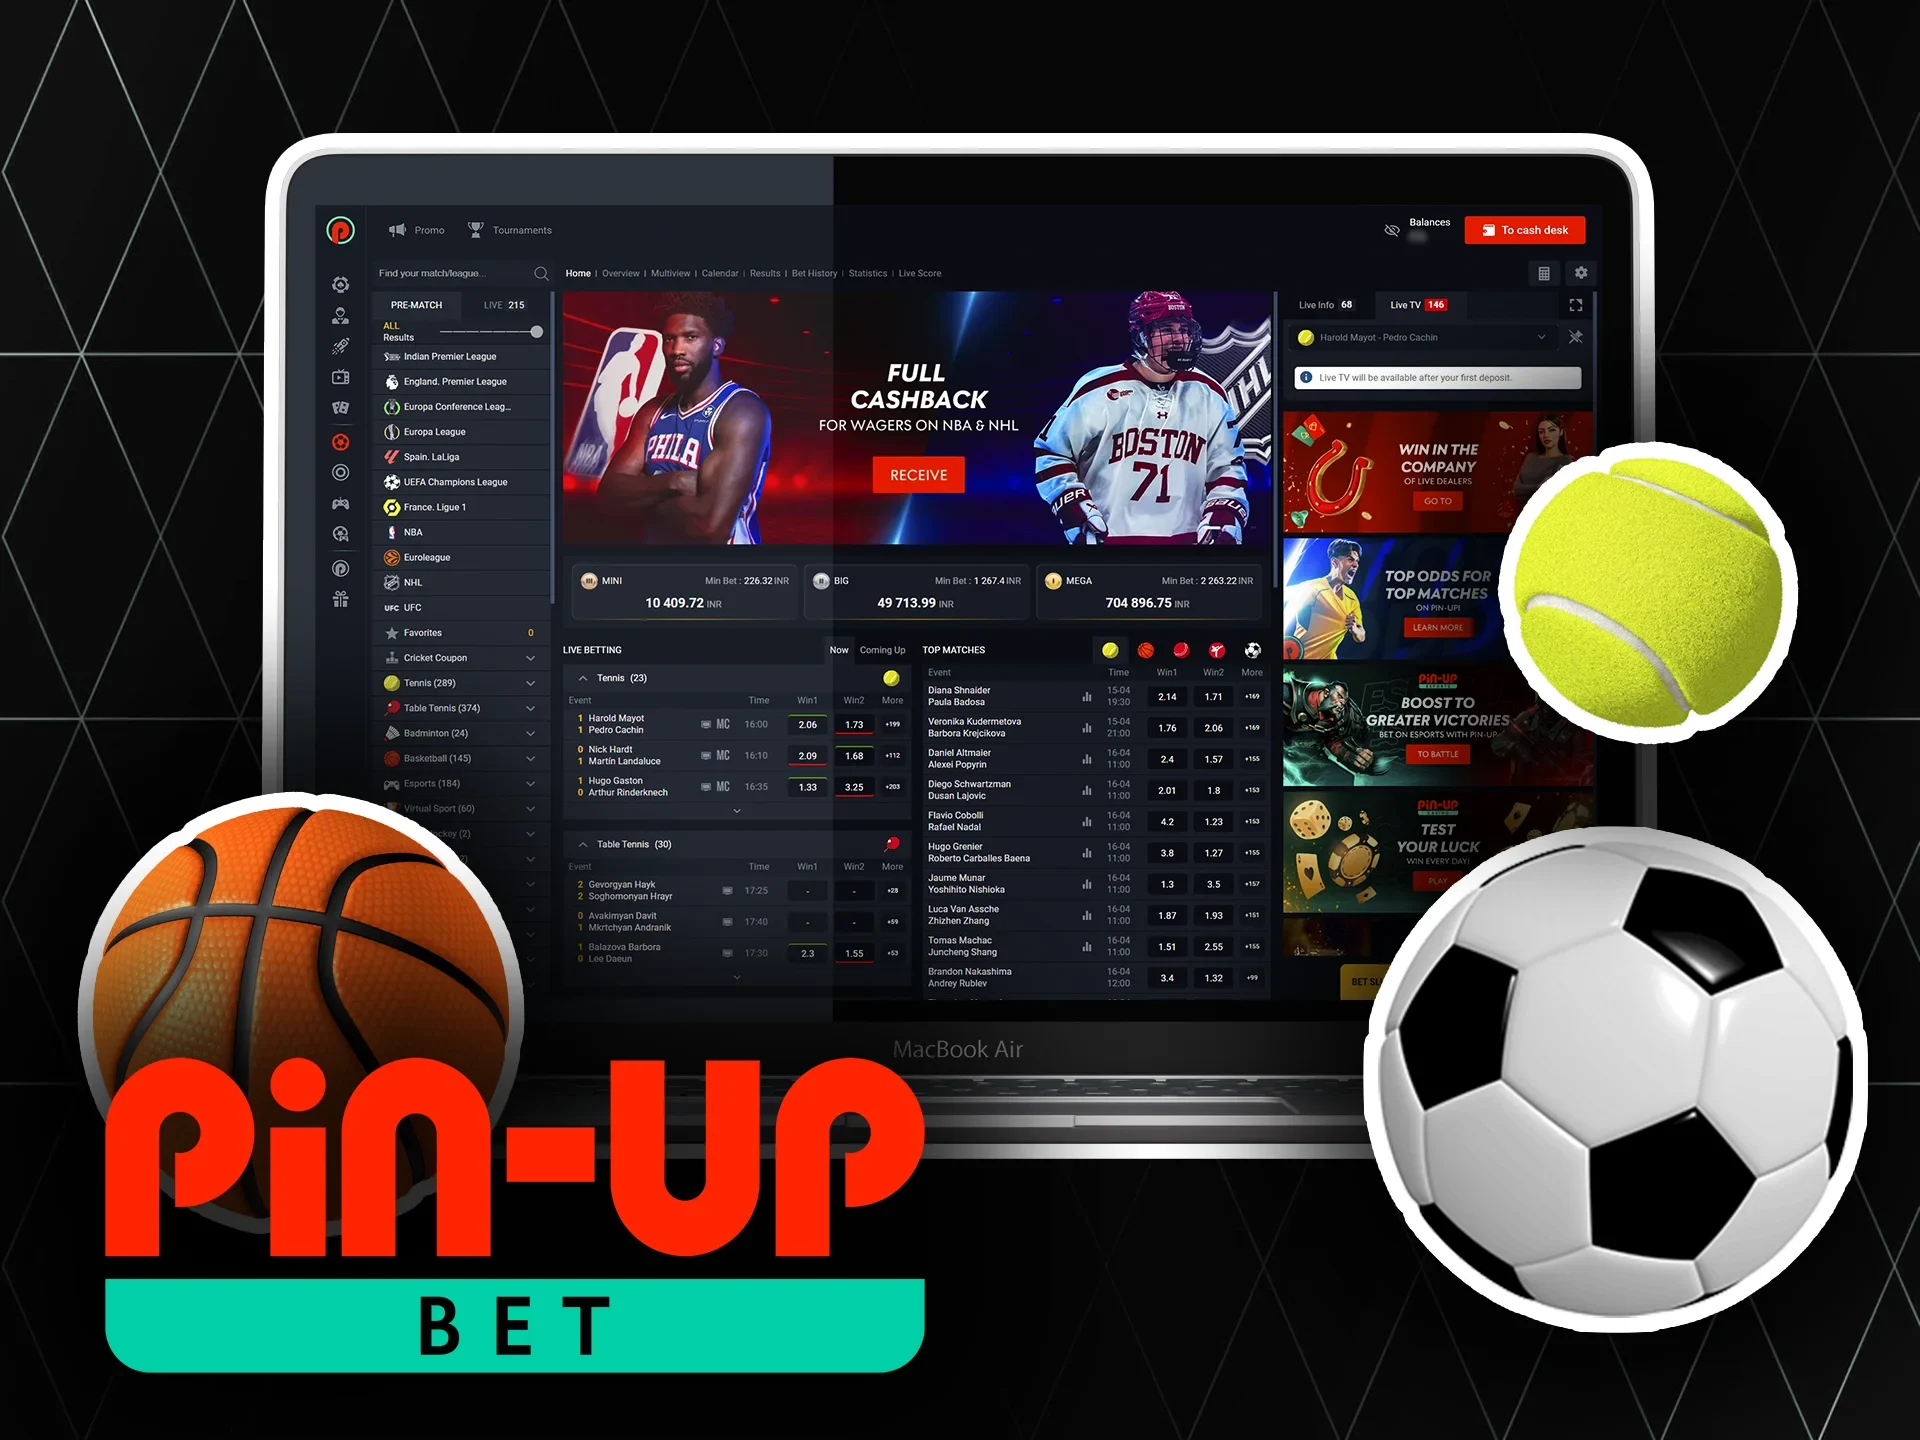 You can also place bets on other different sports, such as football, tennis, basketball and other at Pin-Up.